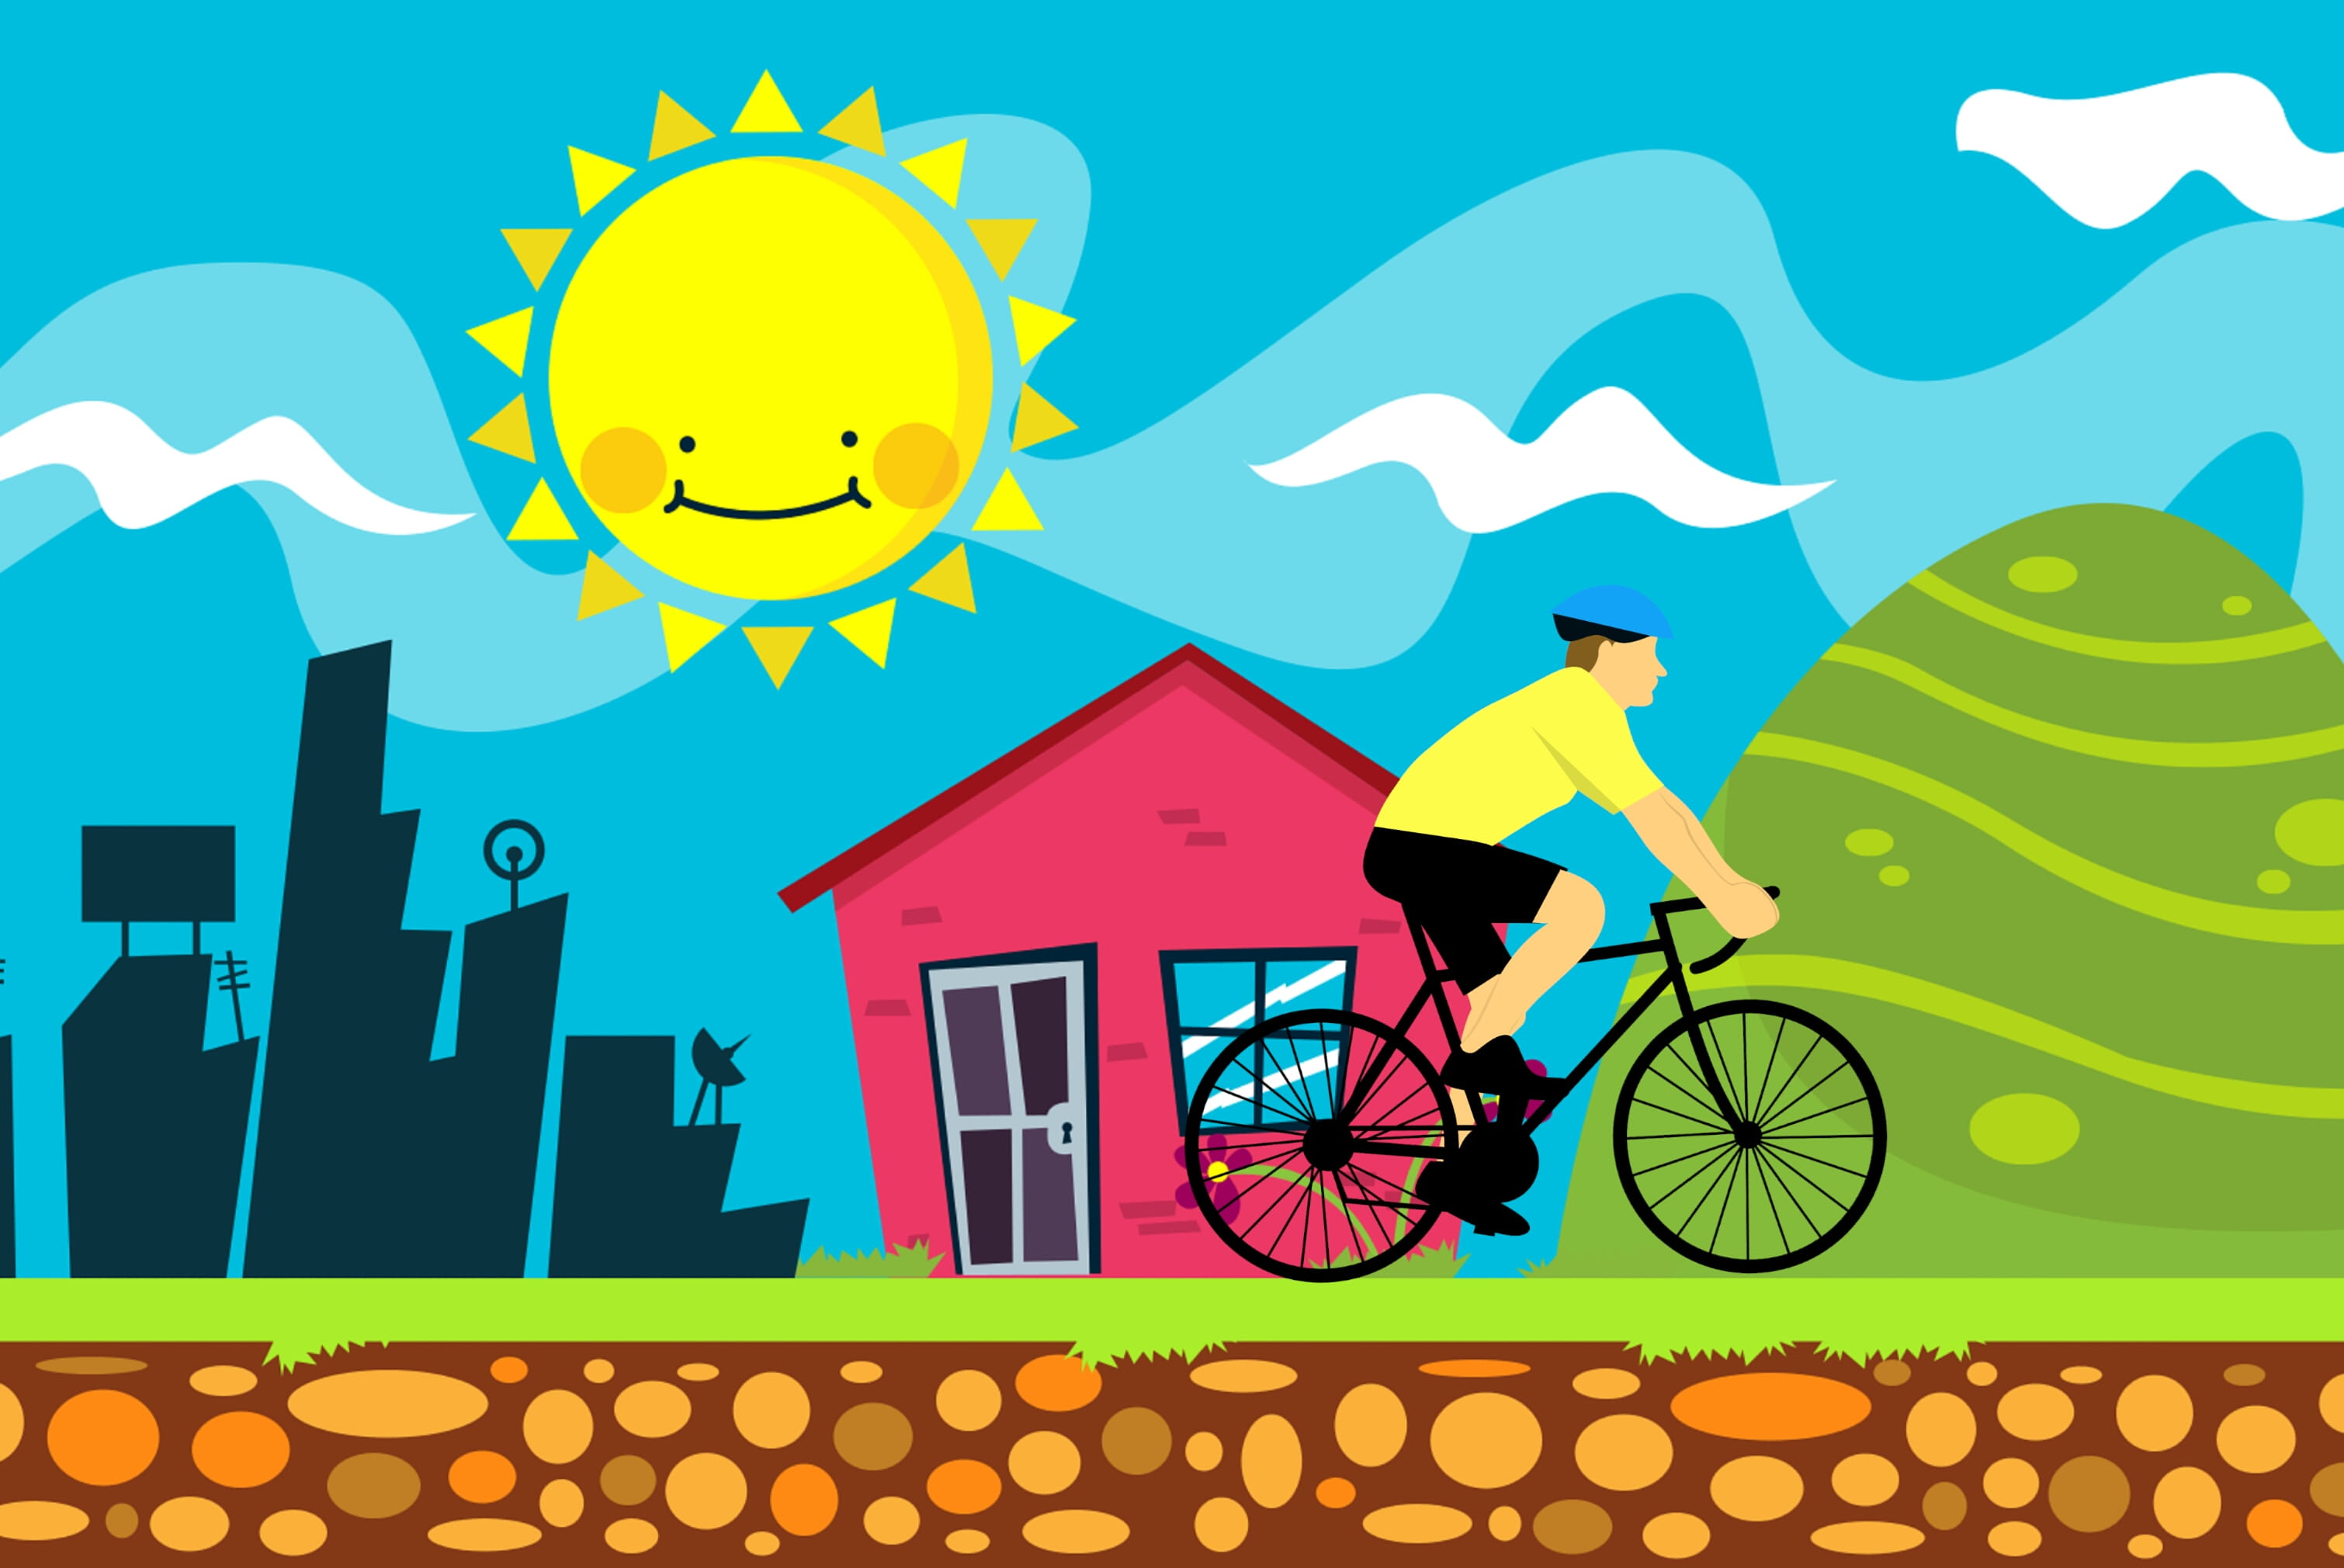 Illustrated scene of rider on bike, rolling past houses and city and a landscape.